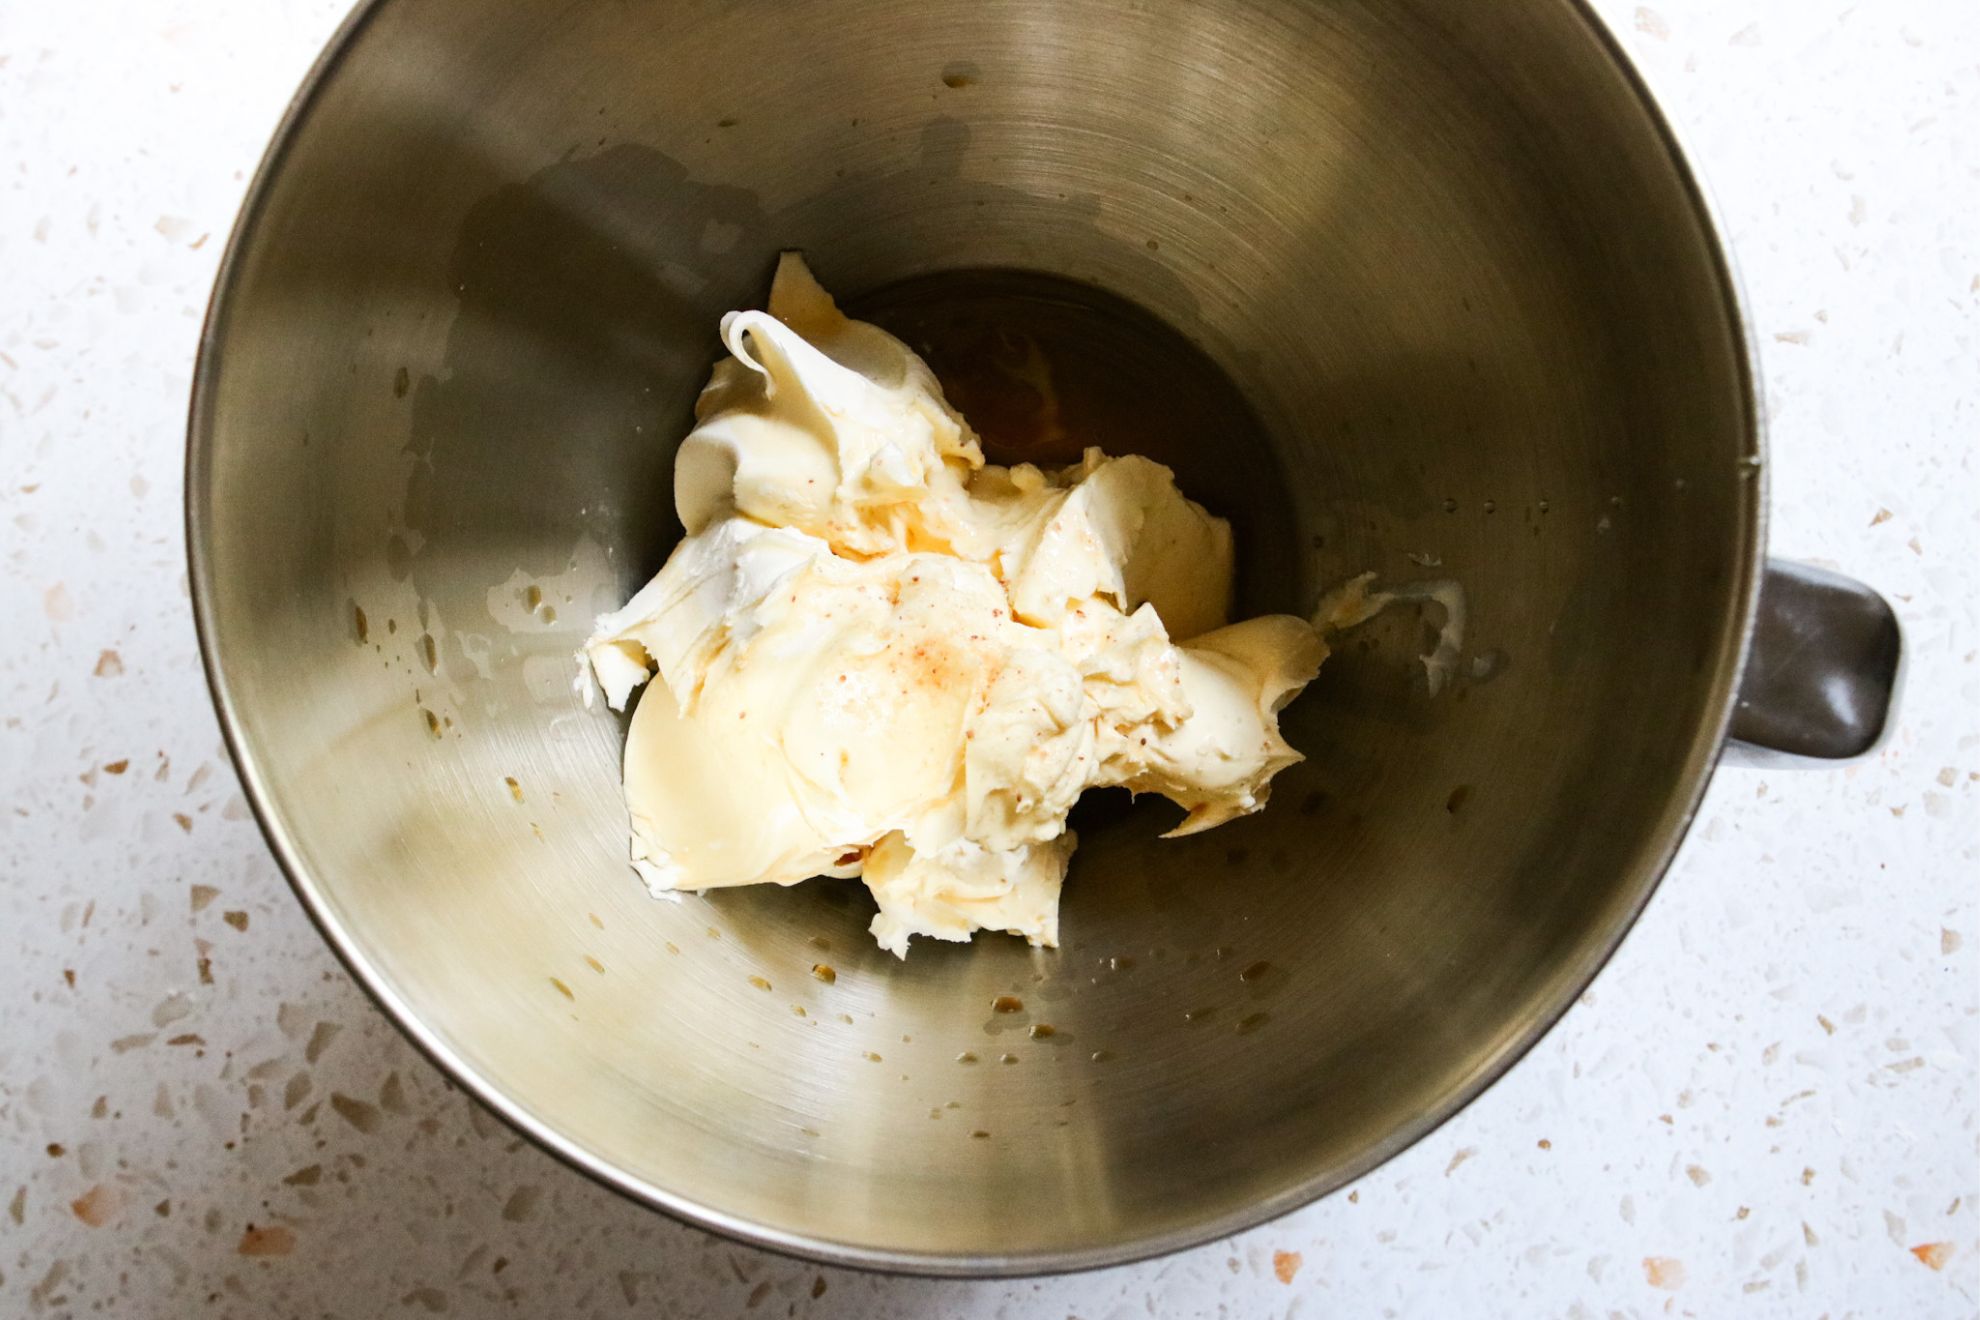 This is an overhead horizontal image of a silver mixing bowl with mascarpone cheese, agave, vanilla and salt in it. The bowl sits on a light terrazzo surface.